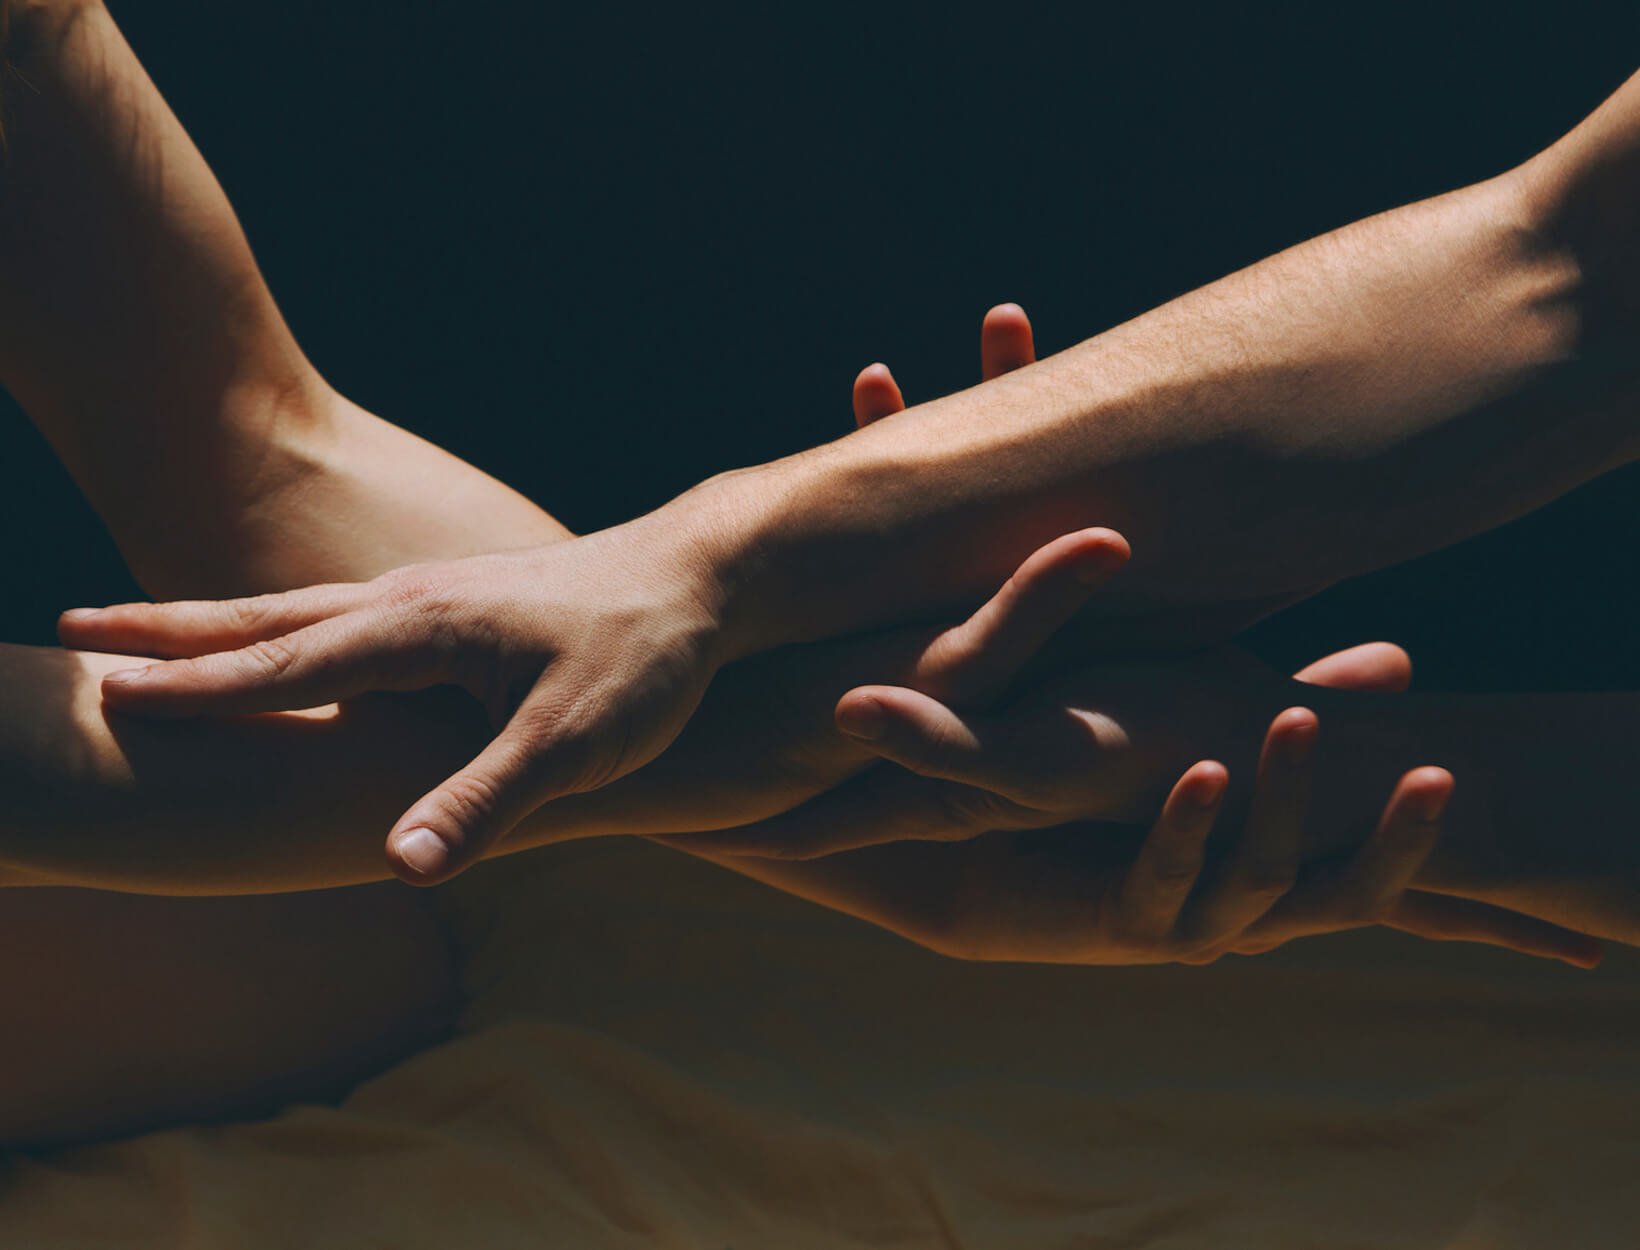 Wolverine Claws, Sensation Play, and Other Ways to Explore Kink | Goop